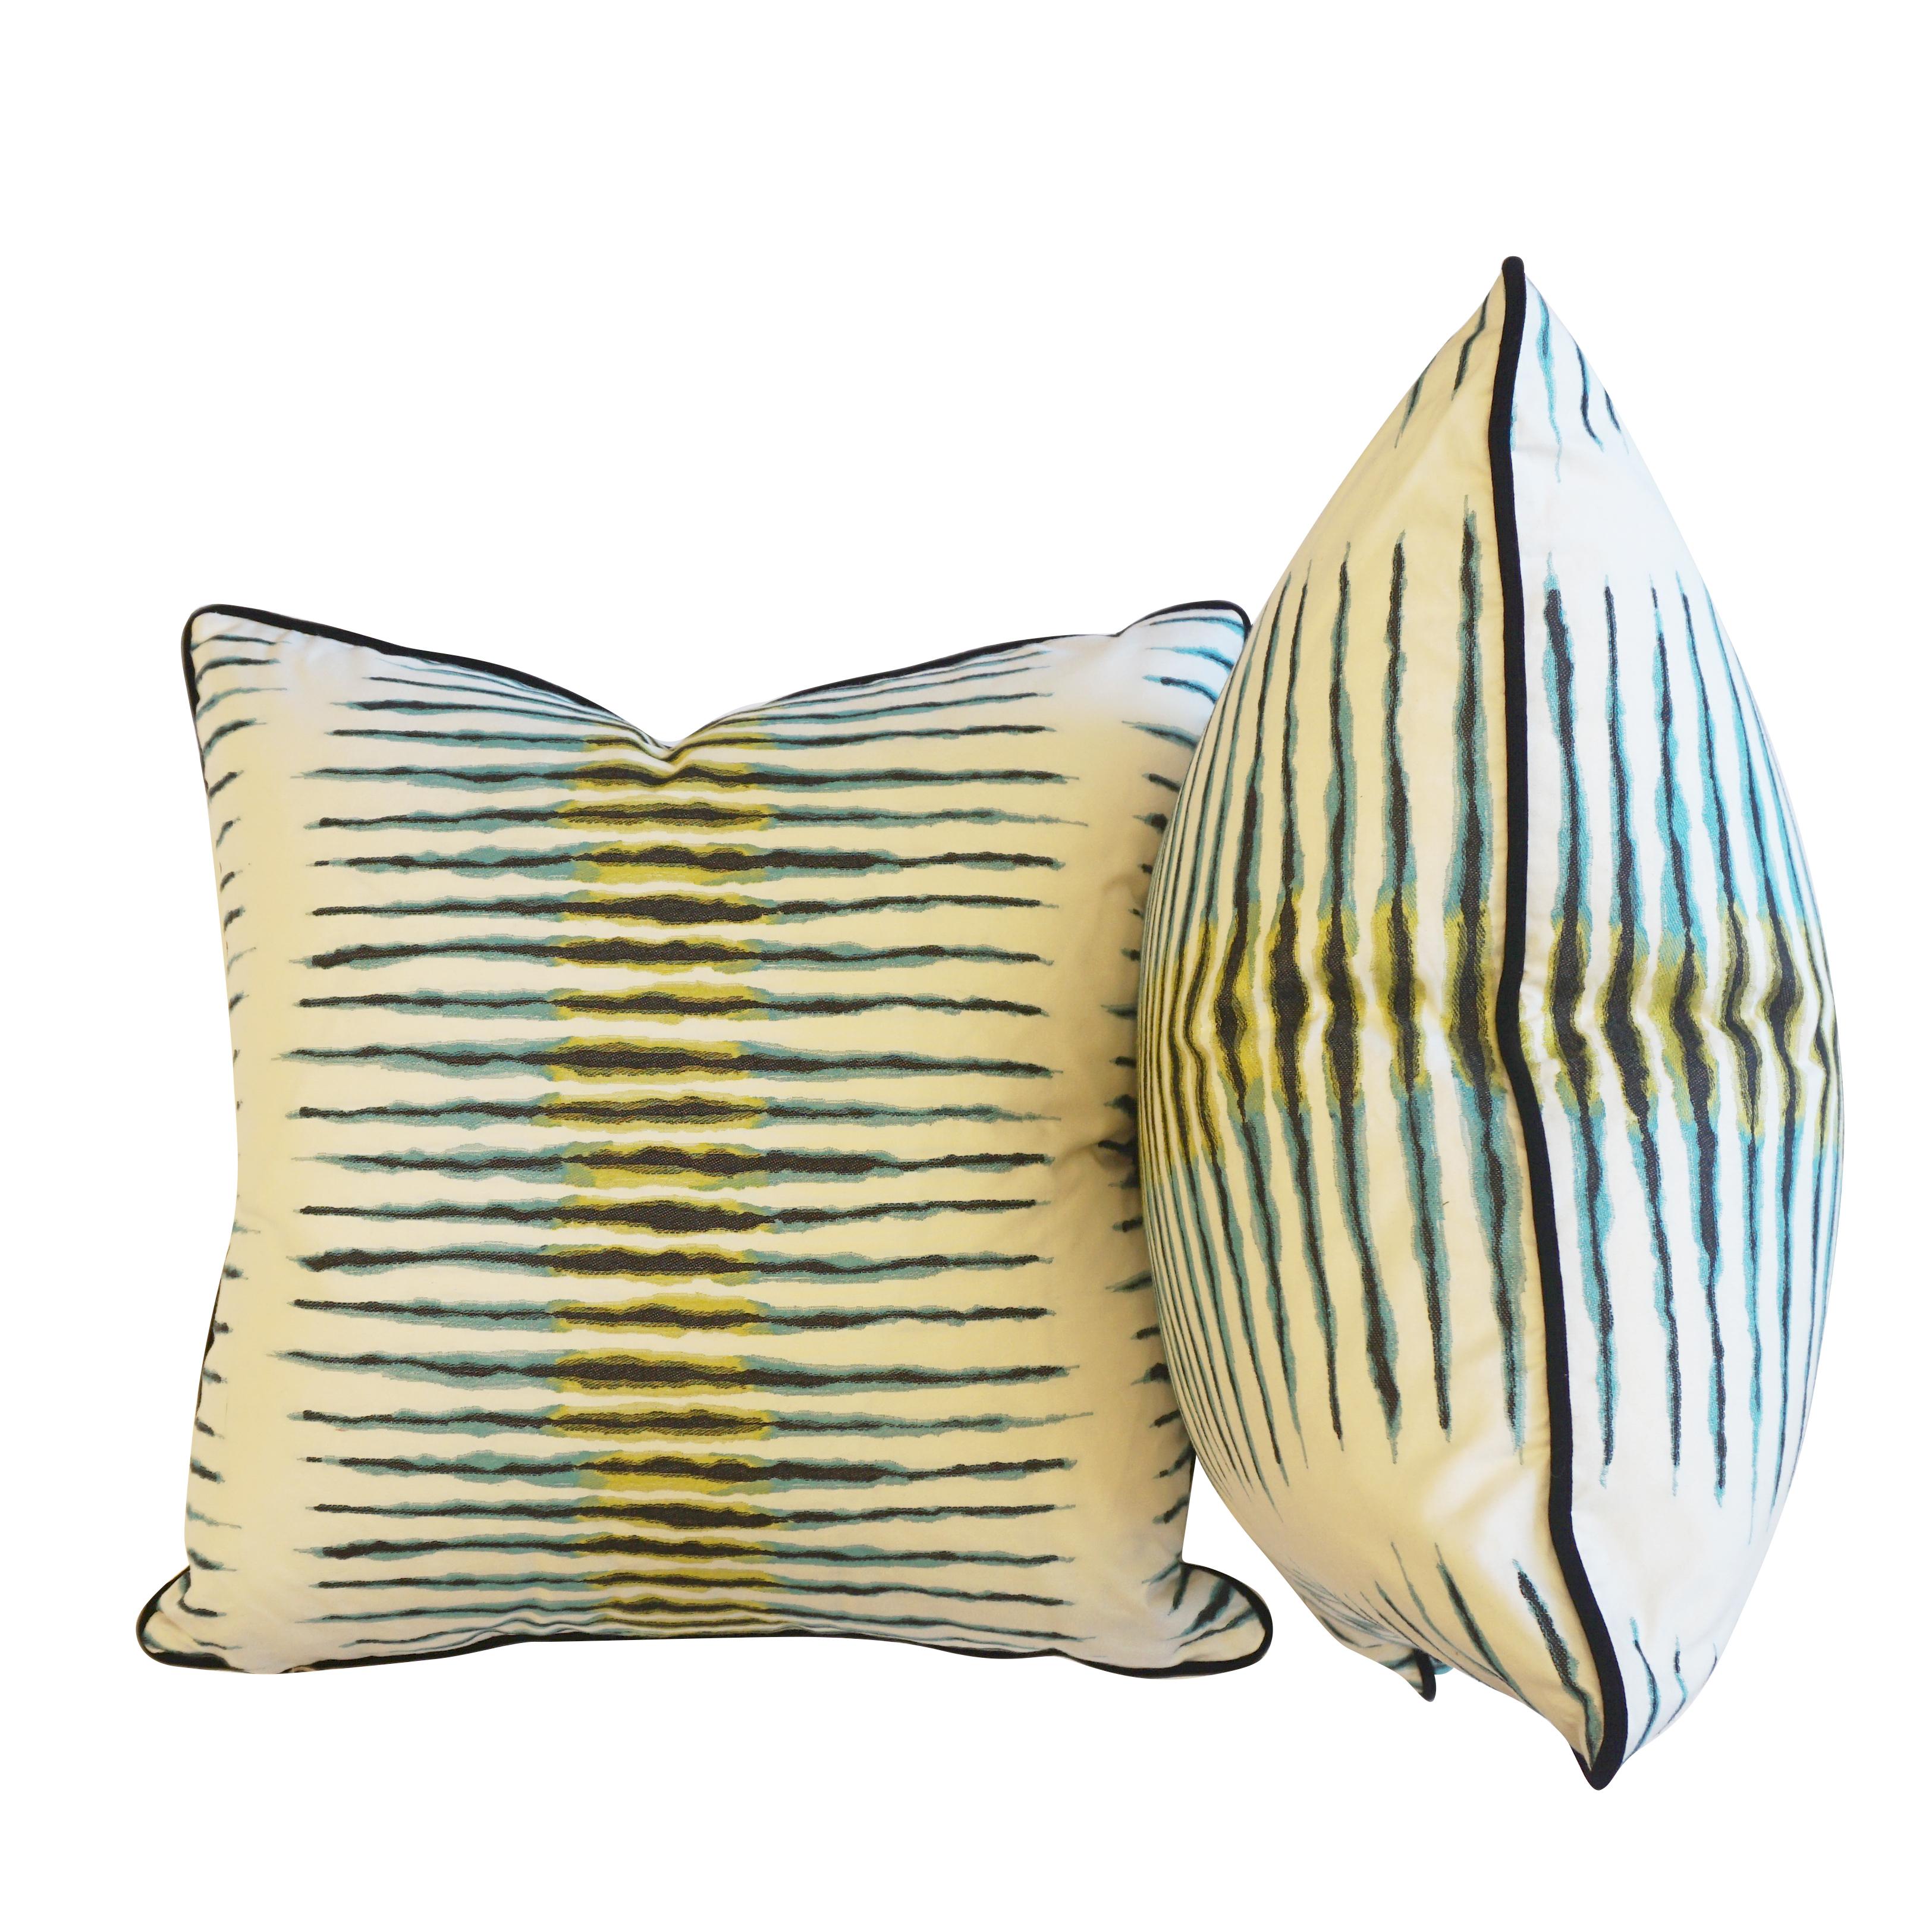 Our Coral Bay throw pillows are made with zinc Coral Bay, a fabric with a “contemporary chevron design knitted from a combination of rustic yarns that give an intriguing texture and relaxed appearance.” 

Measurements

22” x 22”.